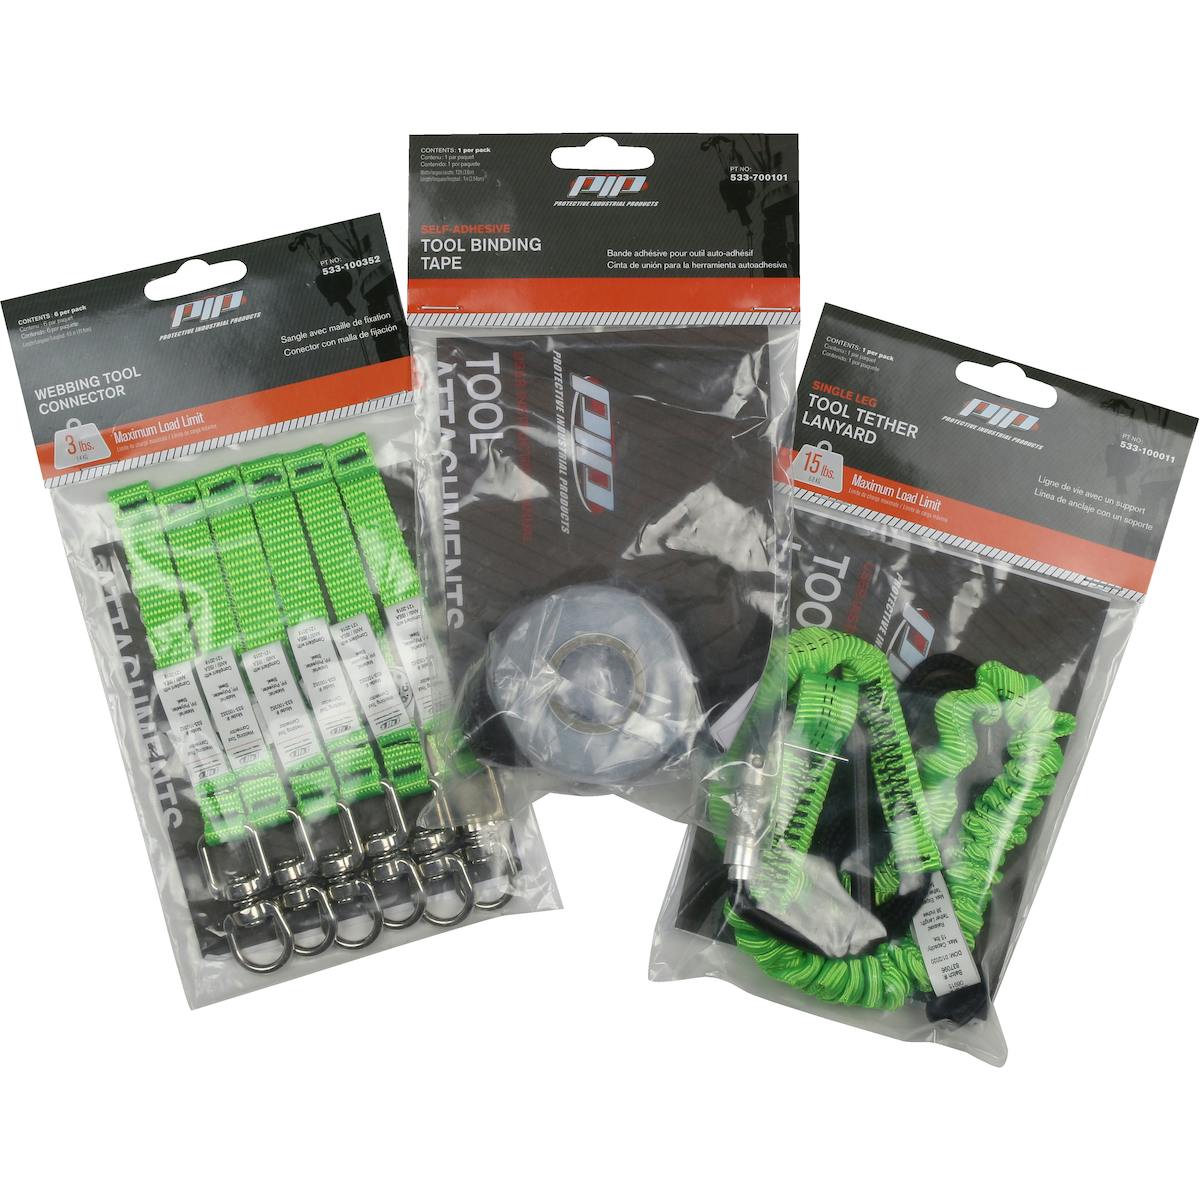 Tool Tethering Kit - includes single leg lanyard, tool connectors, and tool tape - Retail Packed, Green (533-900101) - OS_3